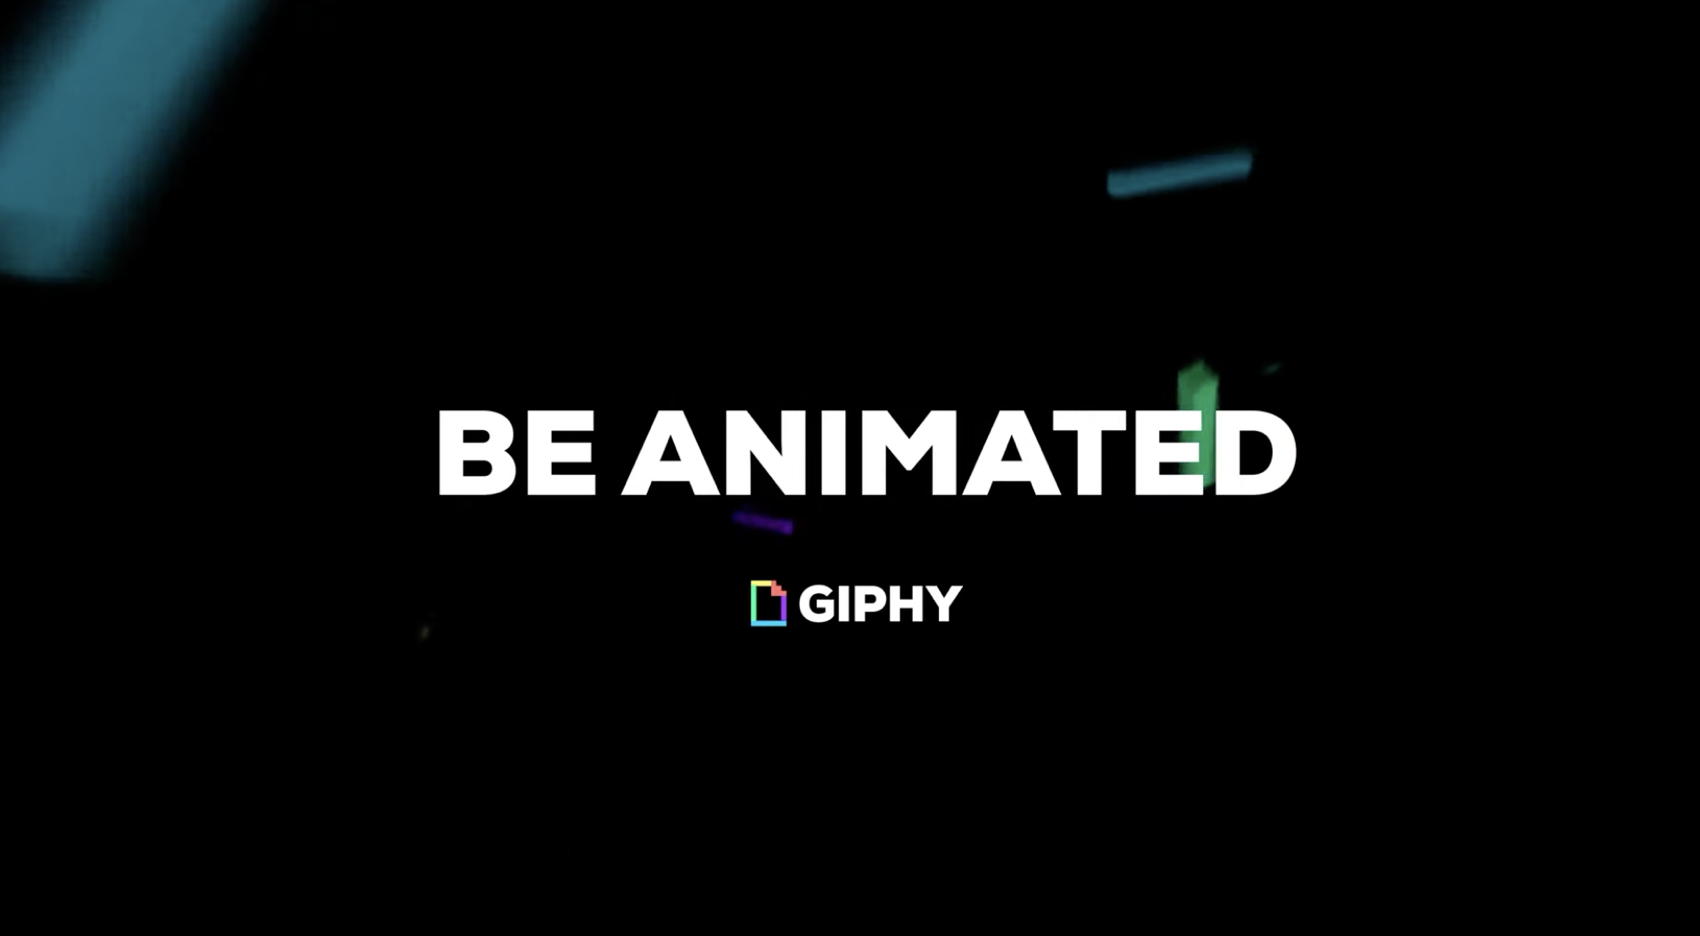 Giphy - Be Animated